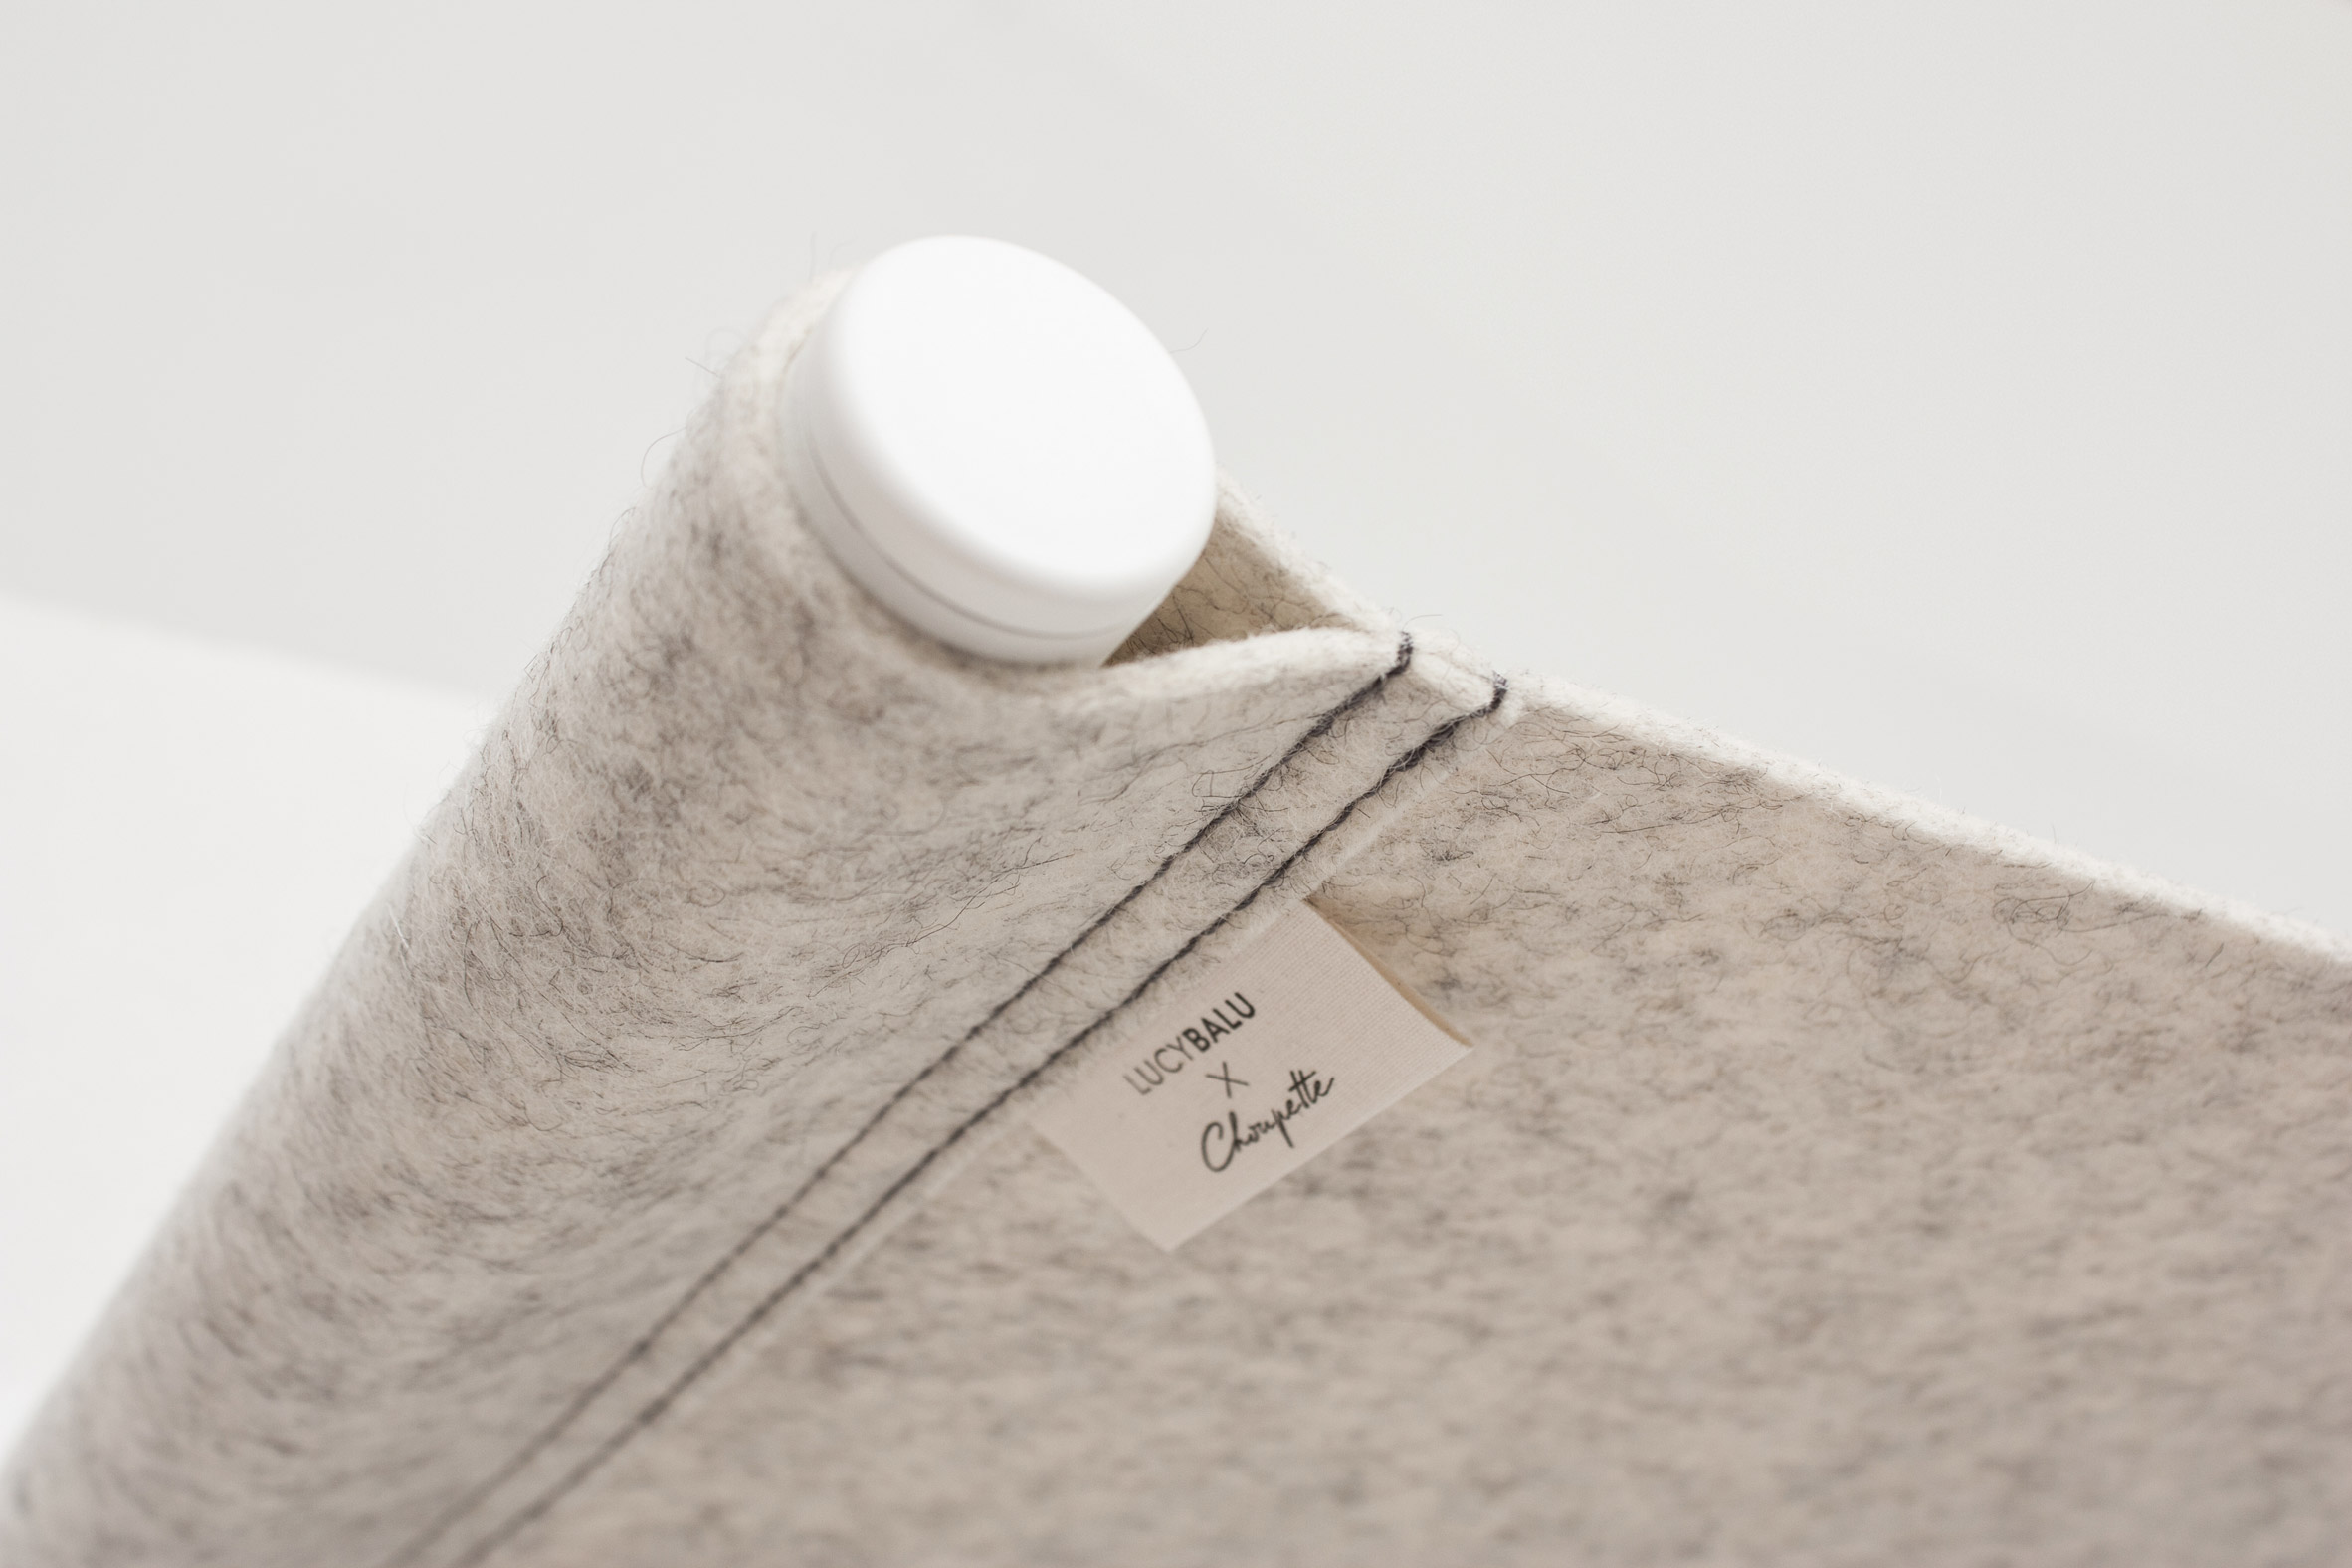 Swing by Choupette x LucyBalu is made of wool